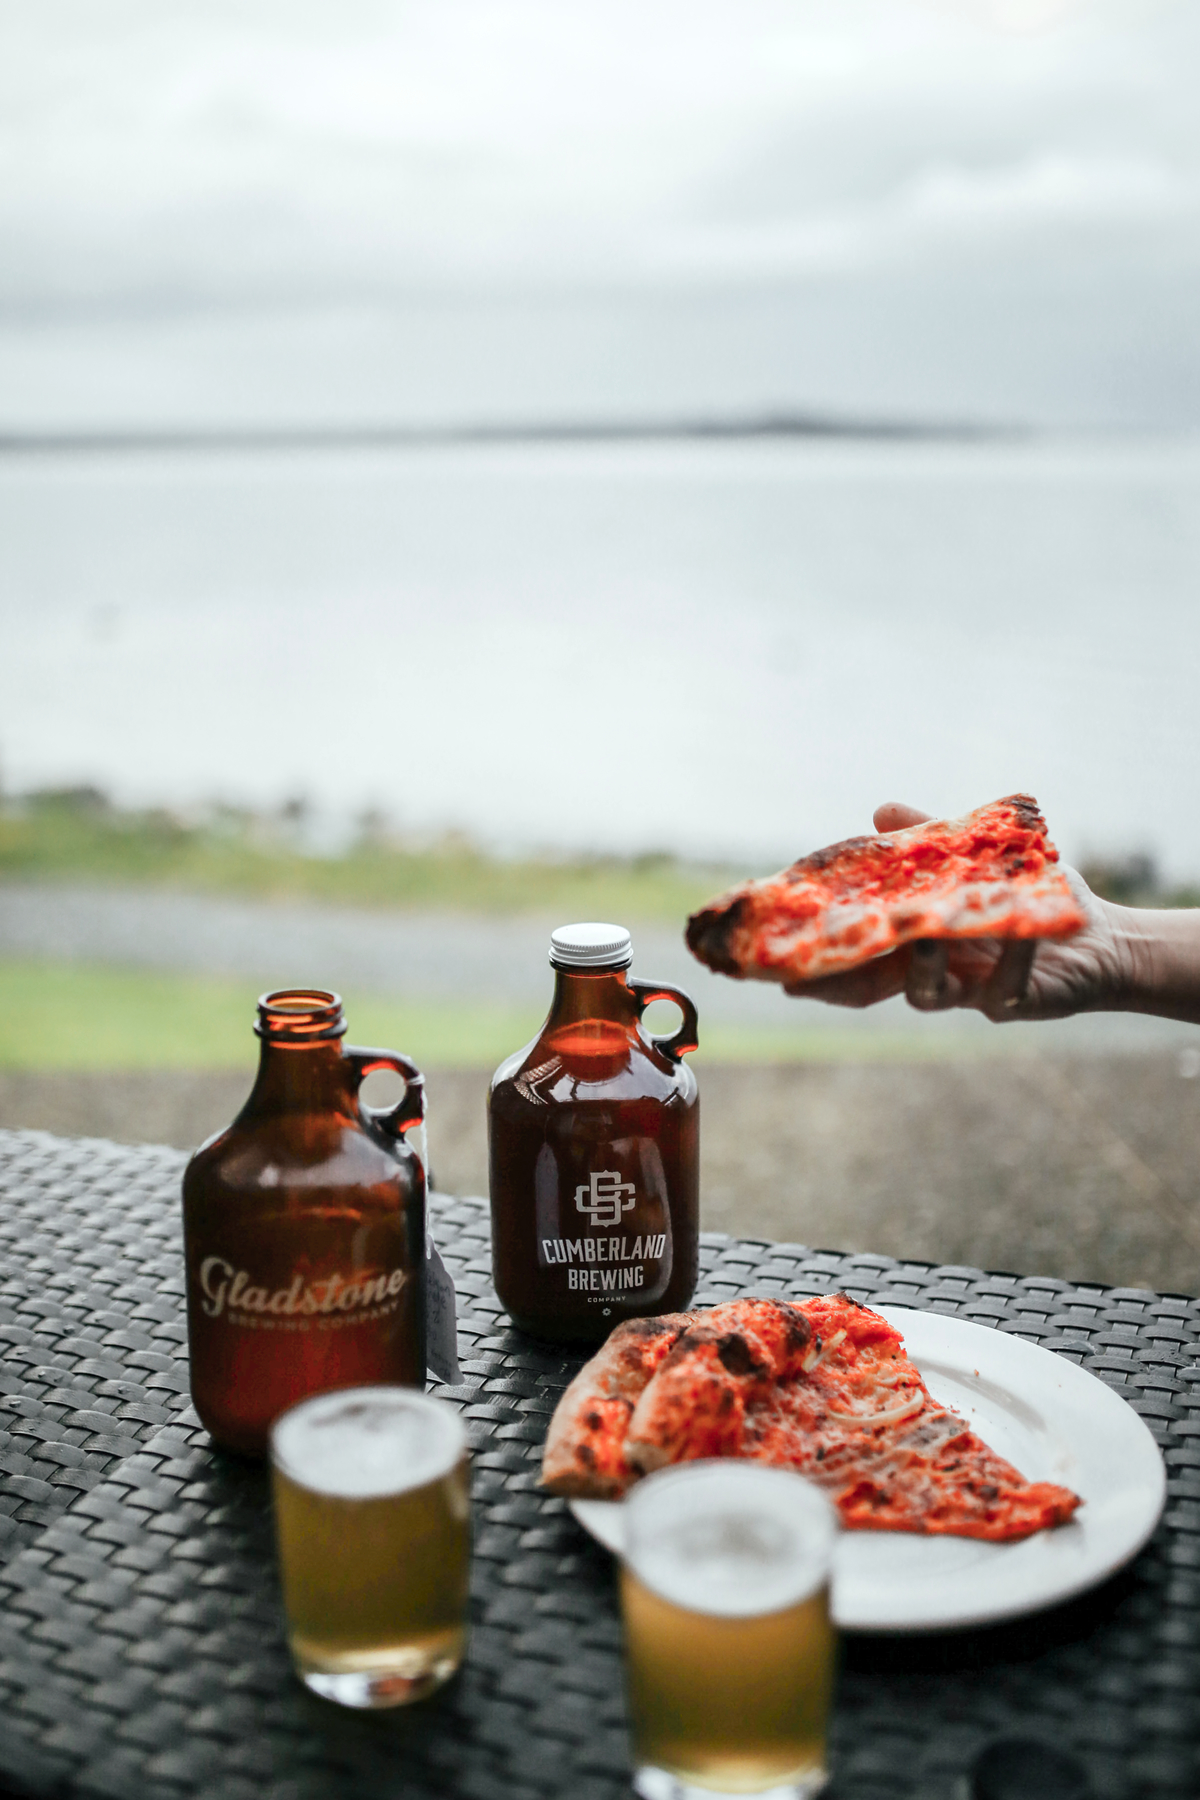 a patio table overlooking the ocean has two growlers, two glasses of beer, a plate with a slice of pizza, and from the right of the frame is a hand holding a second slice.